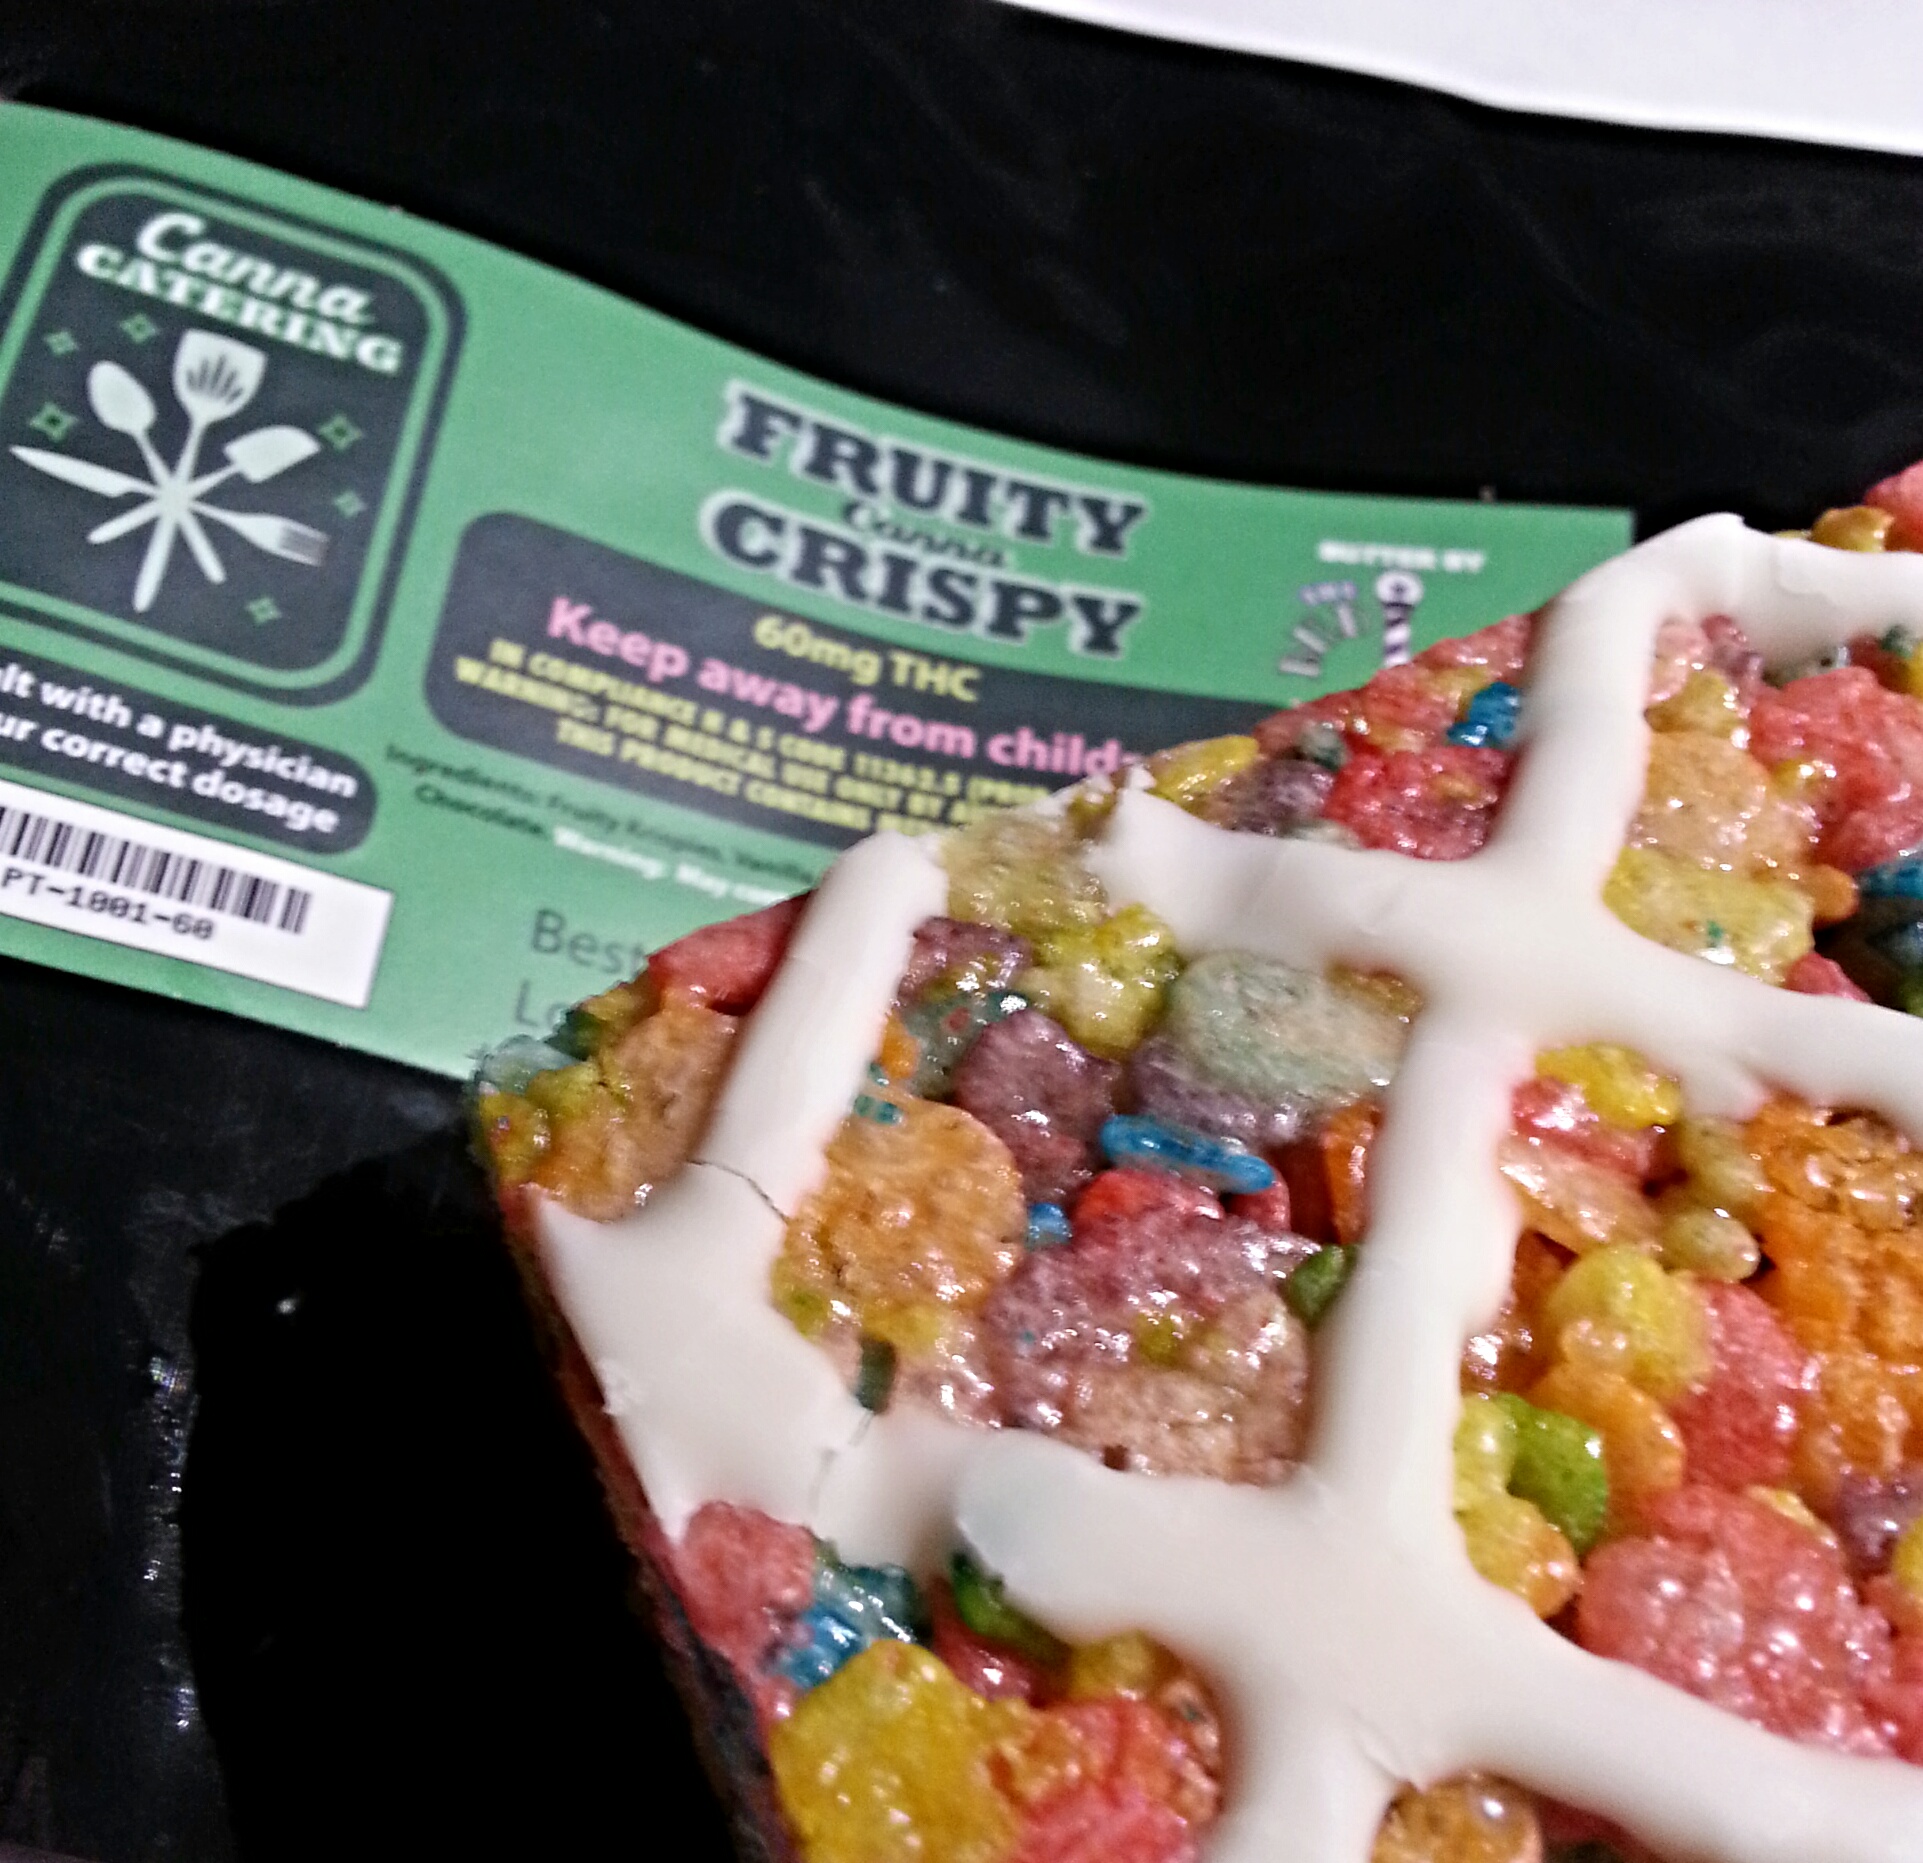 Canna Catering's Fruity Canna Crispy Edible Review